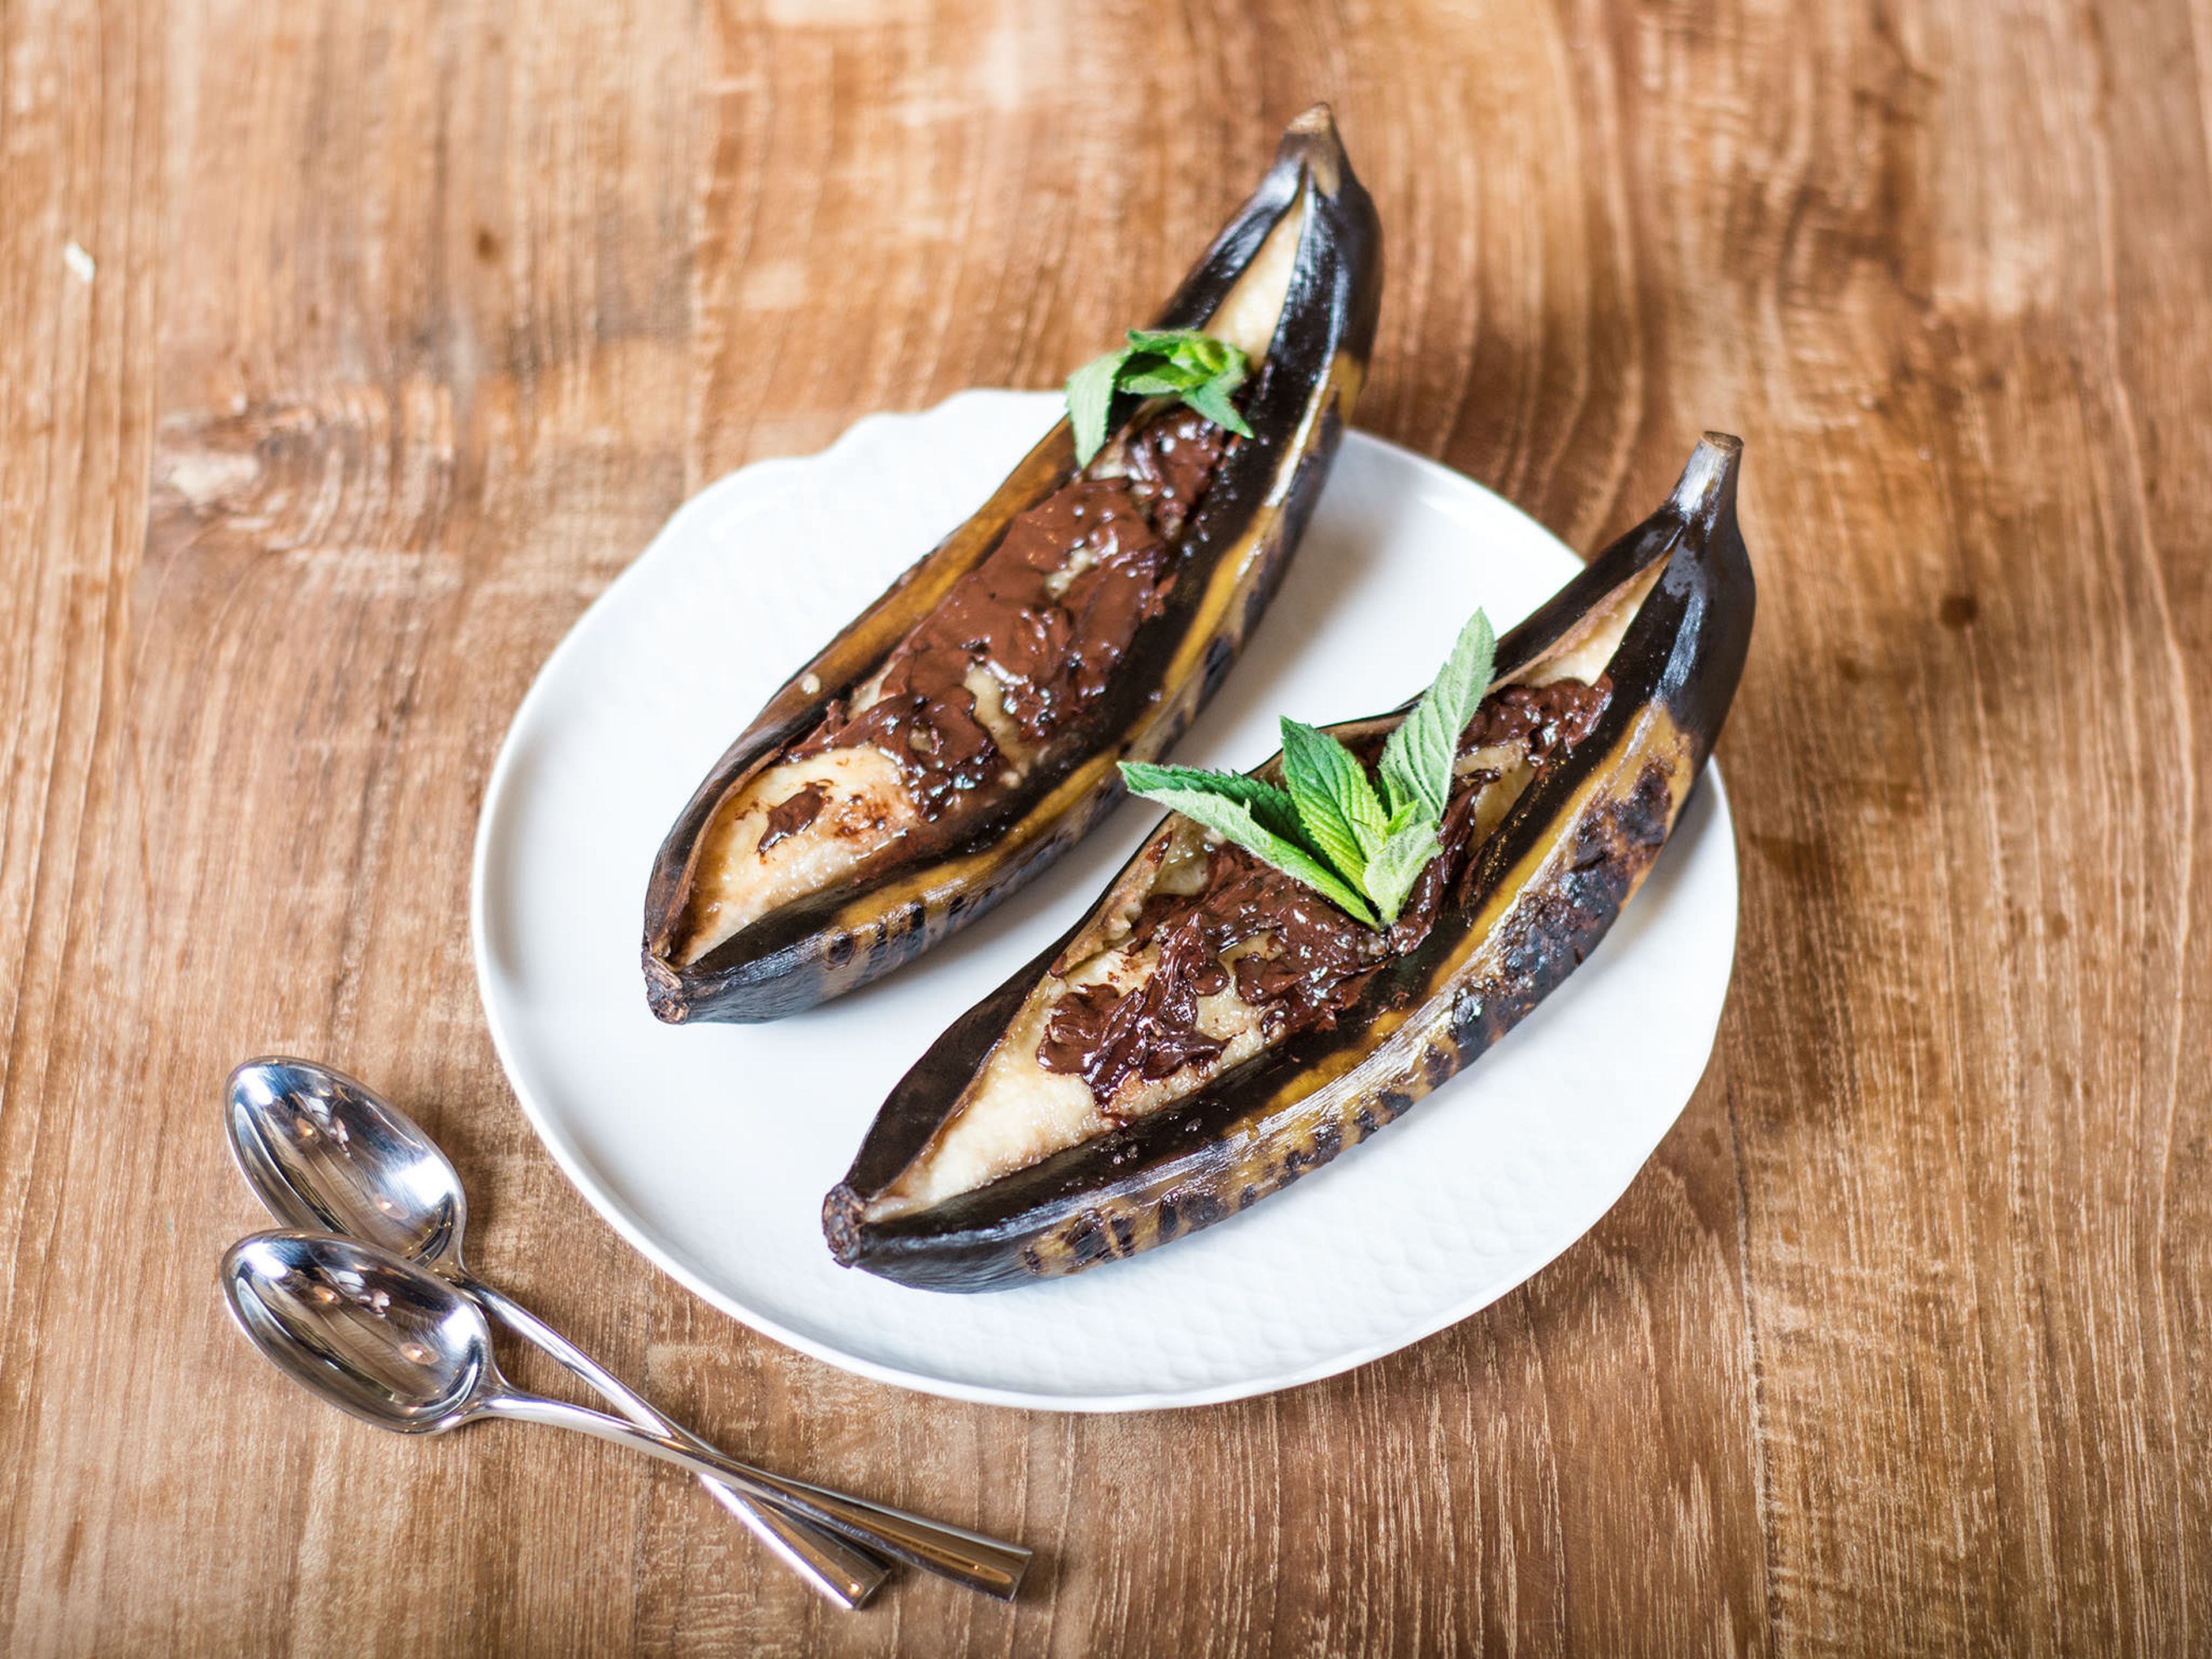 Grilled banana with chocolate